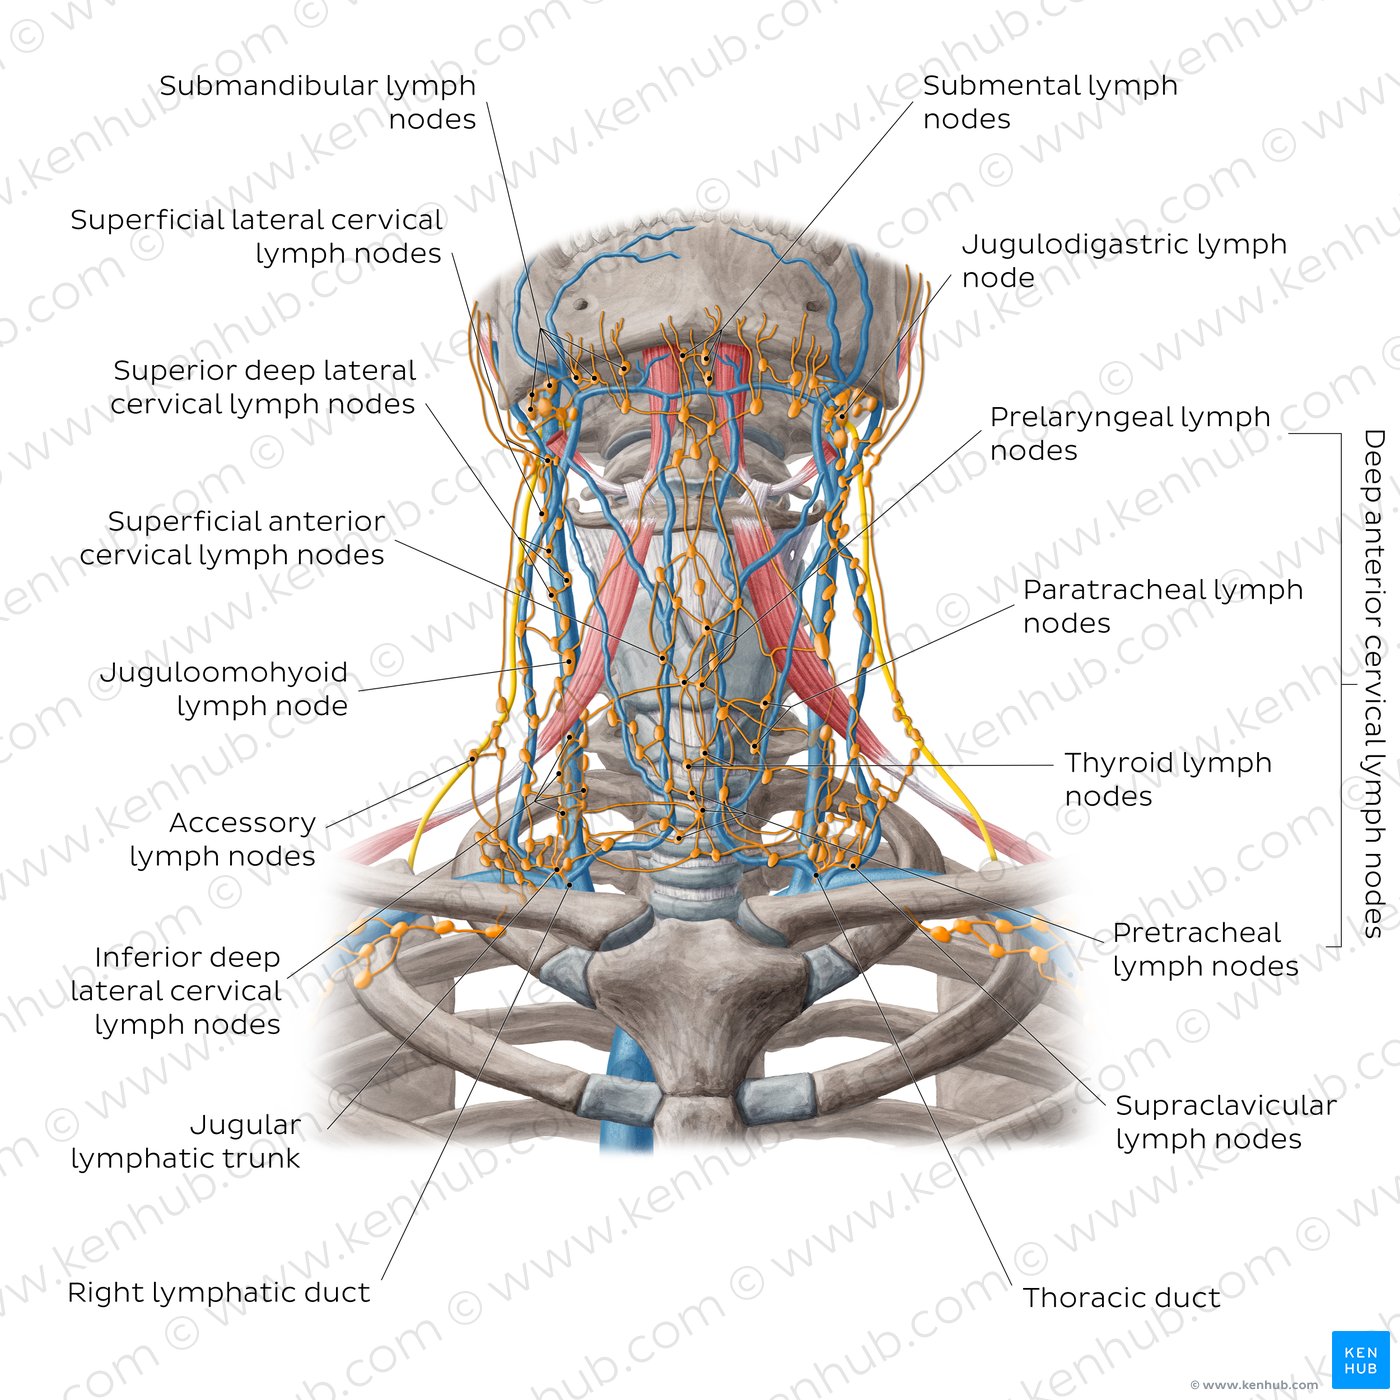 Lymph nodes of the neck